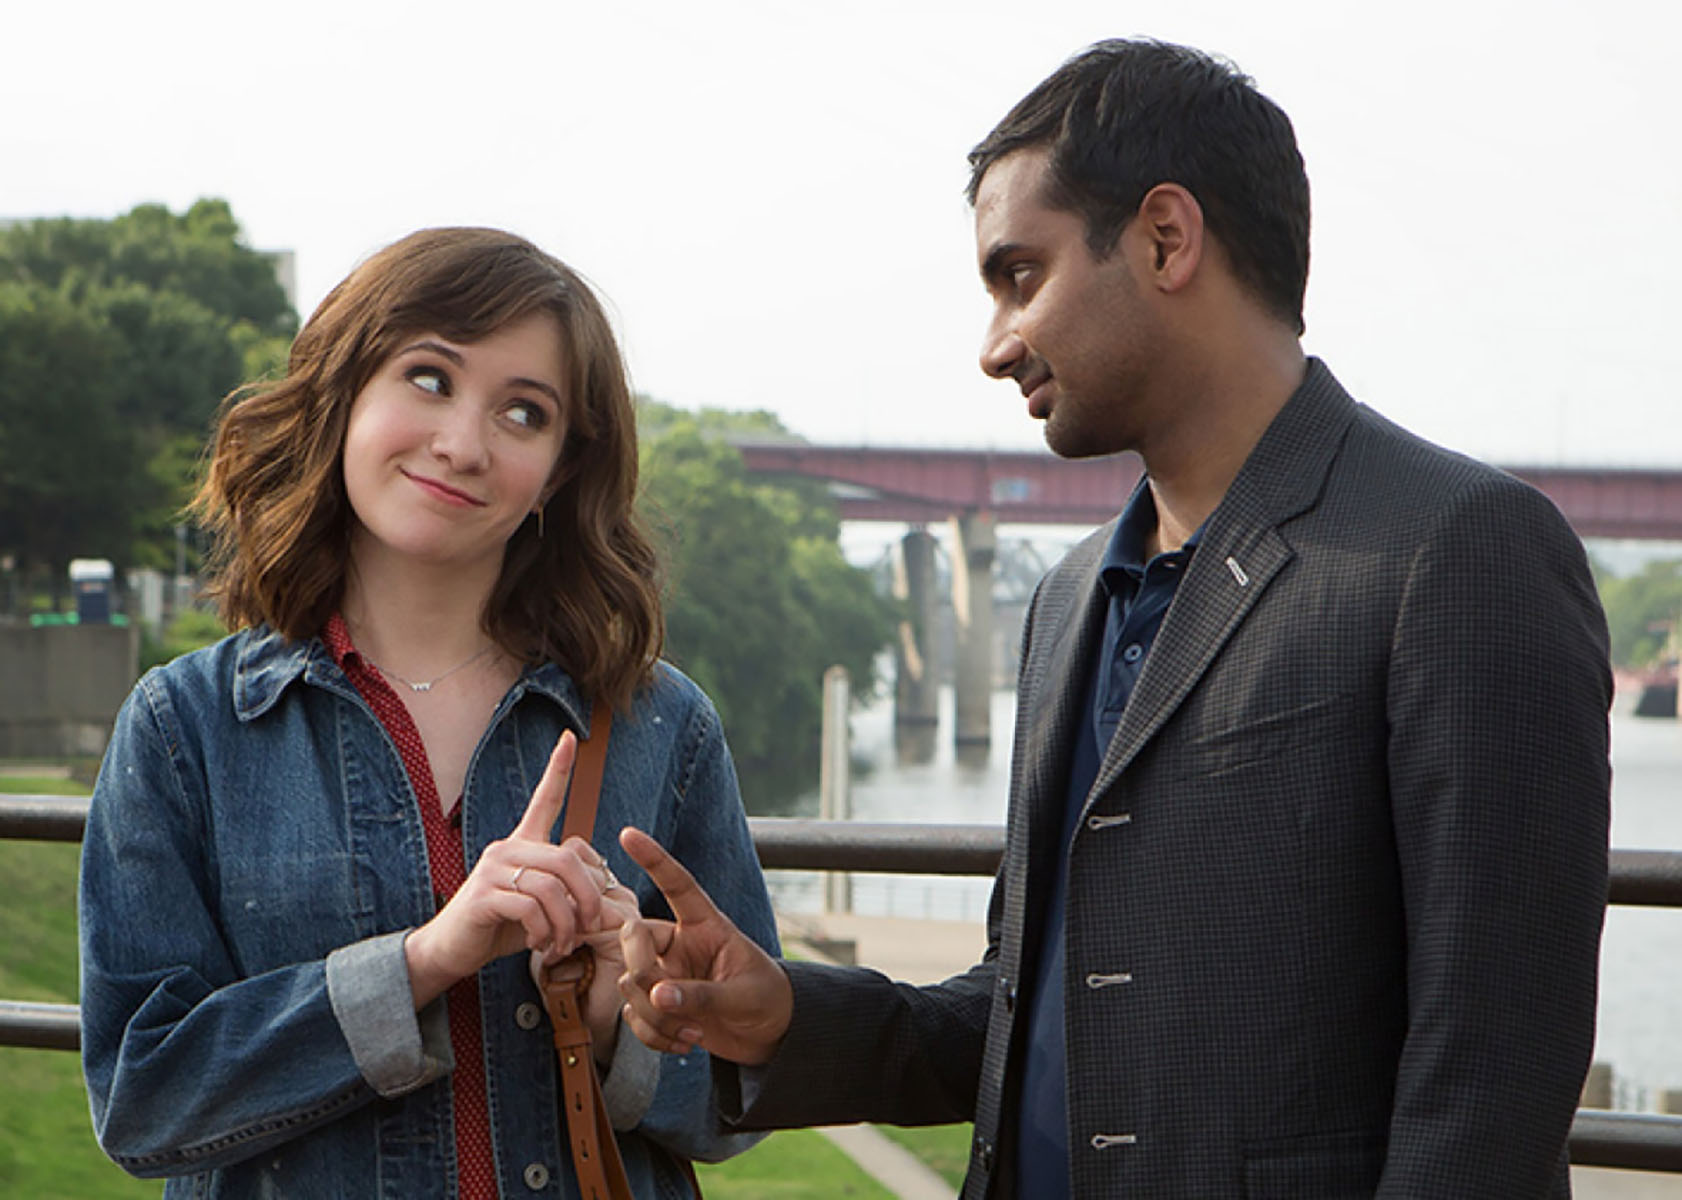 Two characters from "Master of None" have a conversation. Photo courtesy of Netflix, http://www.slate.com/content/dam/slate/articles/arts/television/2015/11/151111_TV_Master-Of-None.jpg.CROP.promo-xlarge2.jpg.